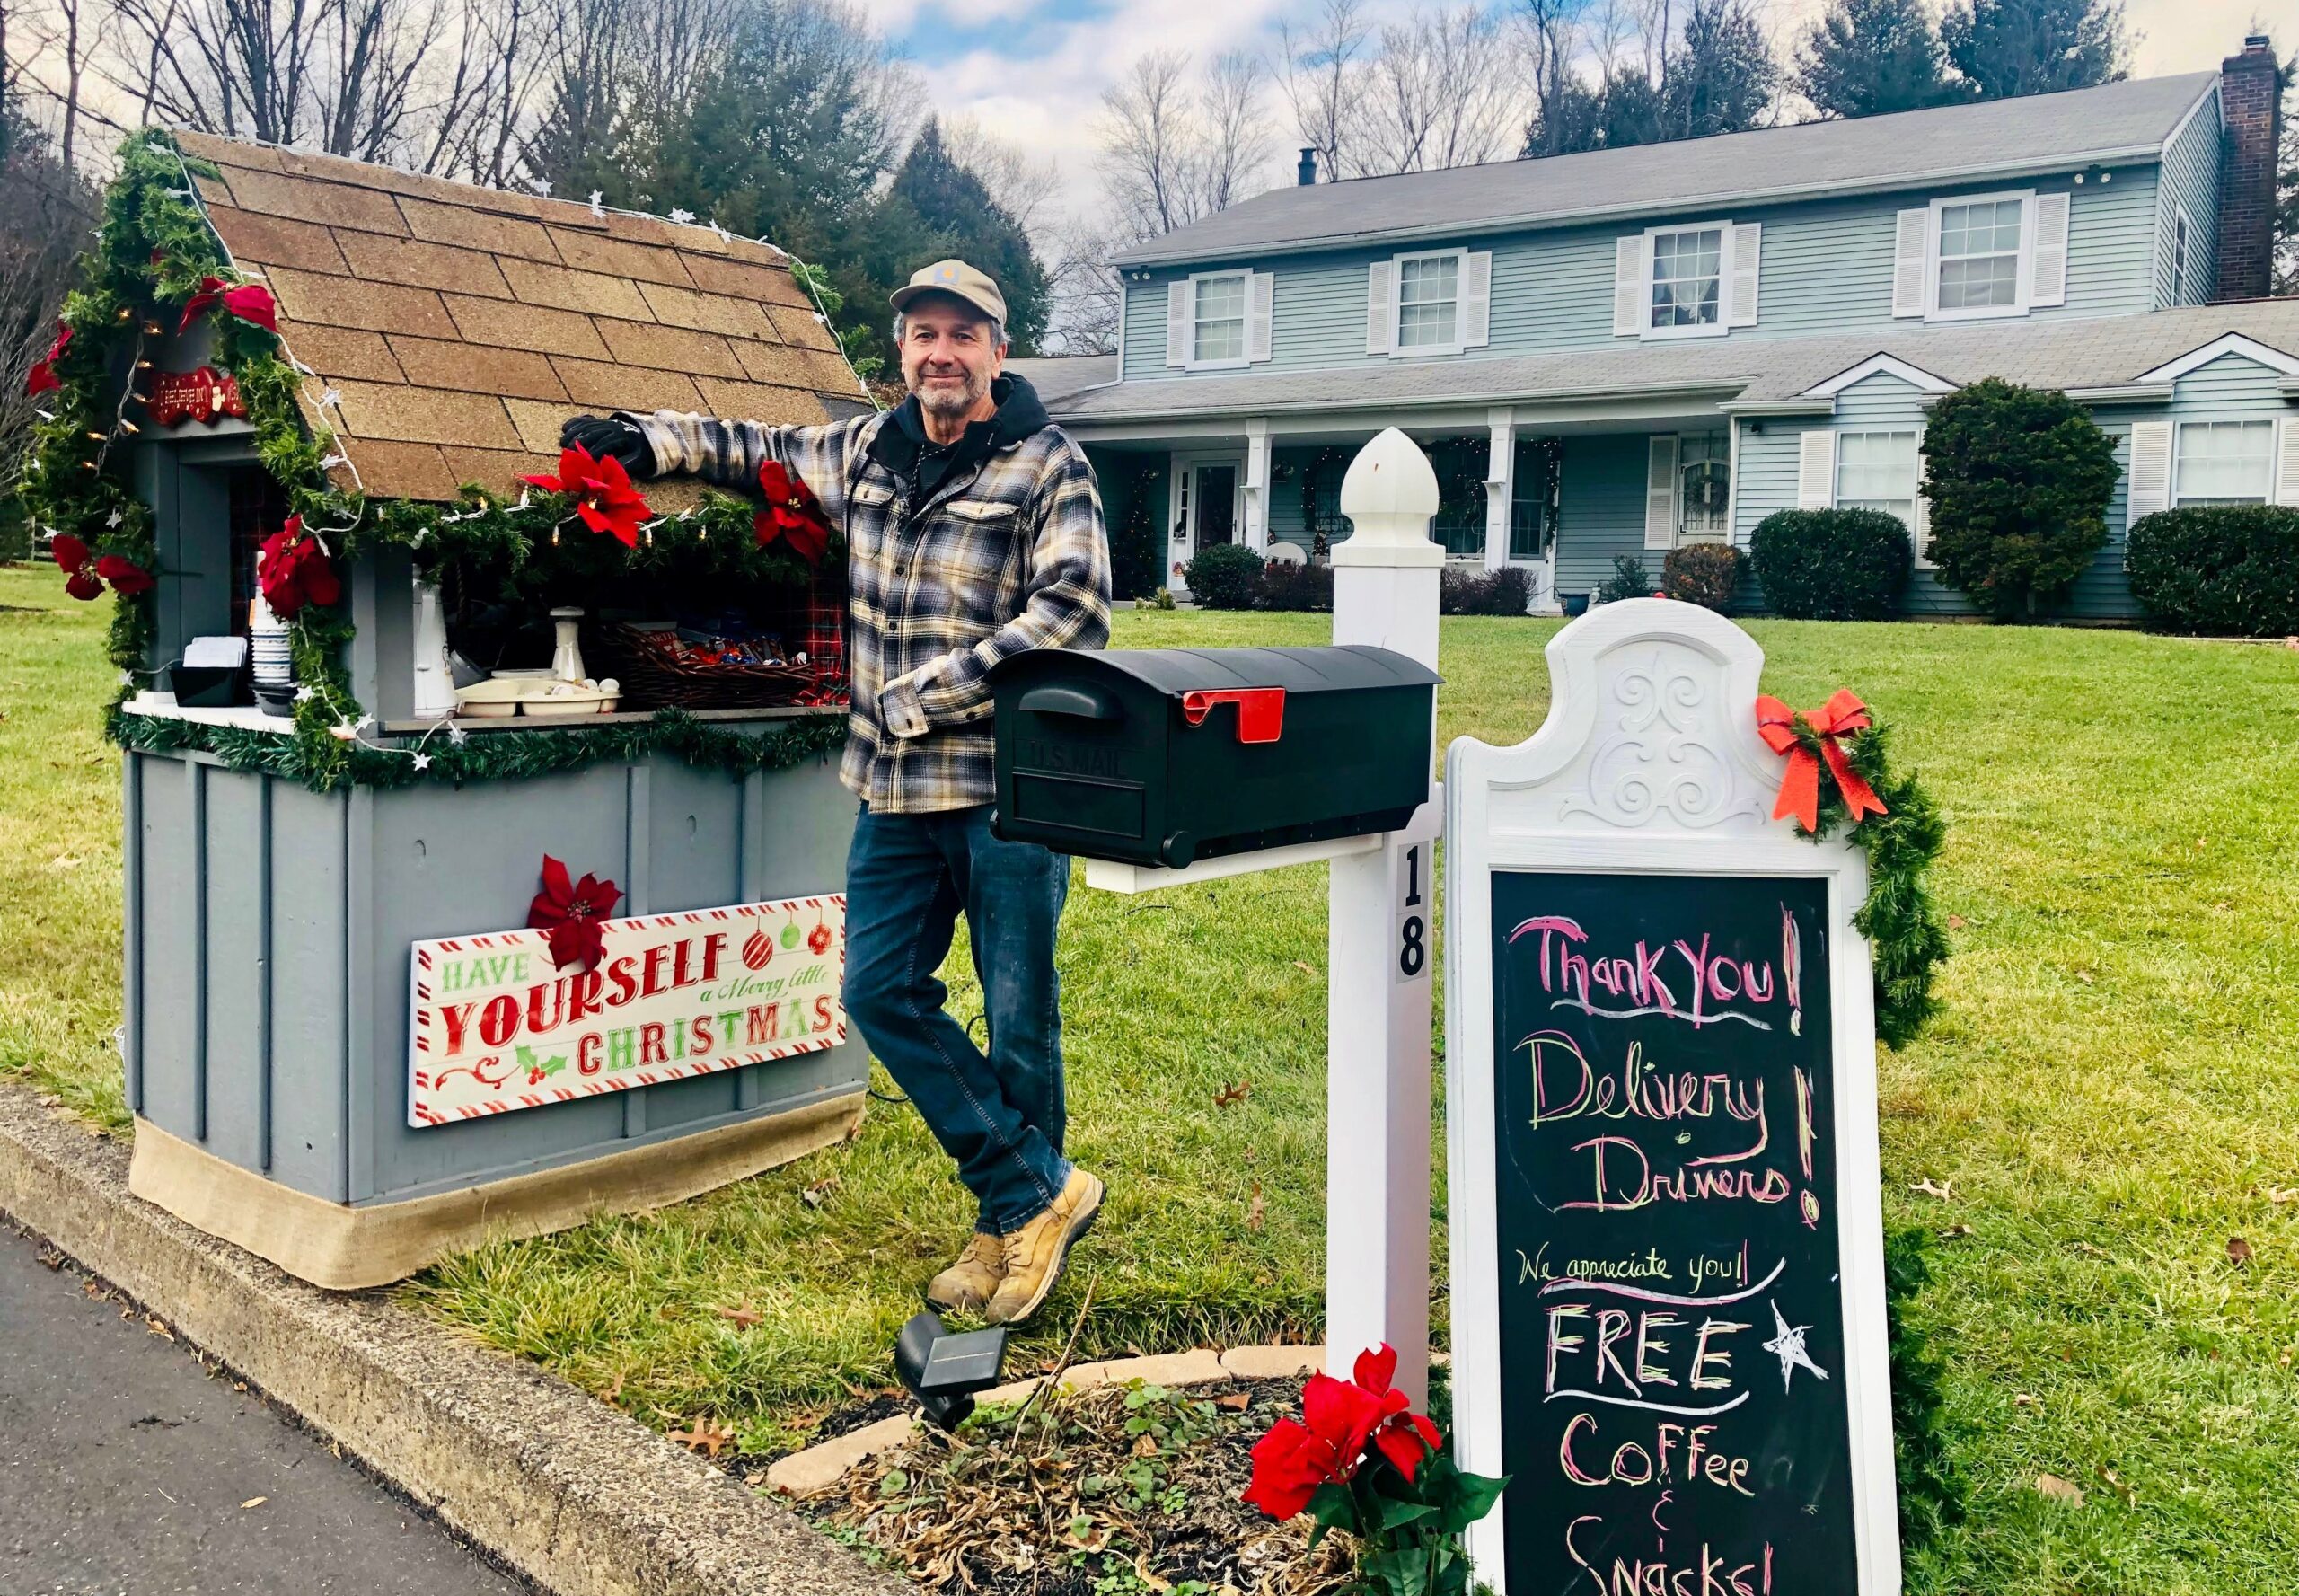 Greg Flego, 65, outside his Doylestown, Pa., home with his new holiday rest station for delivery workers. (Credit: Nadine Flego)